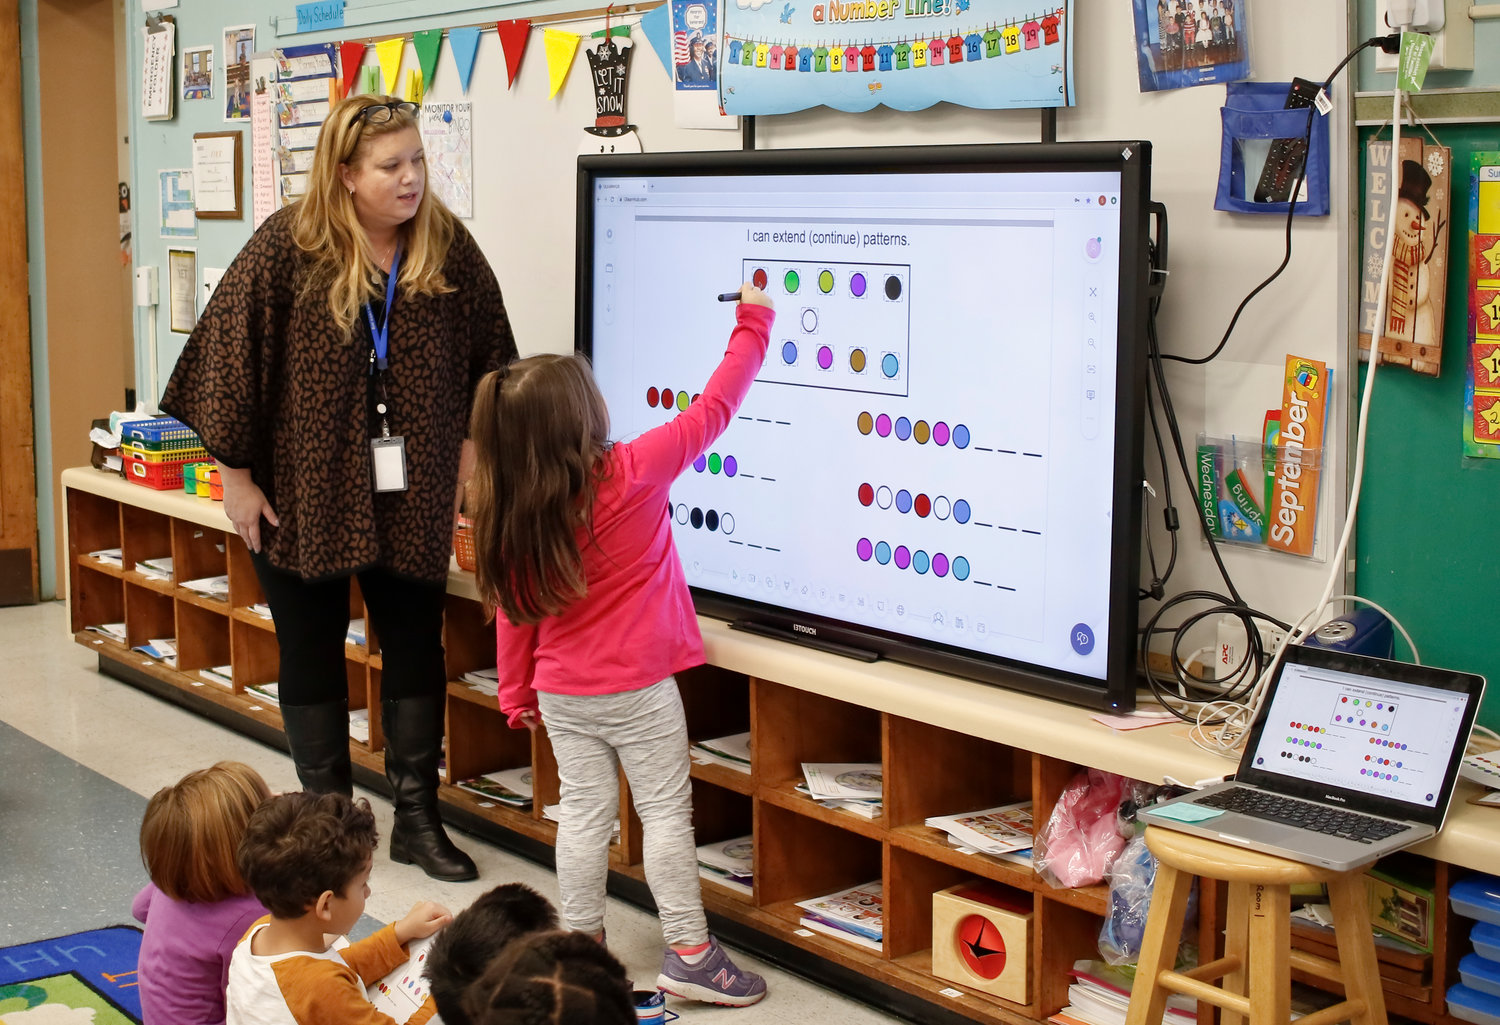 District 24 adopts new teaching technology in the classroom | Herald Community Newspapers | www.liherald.com